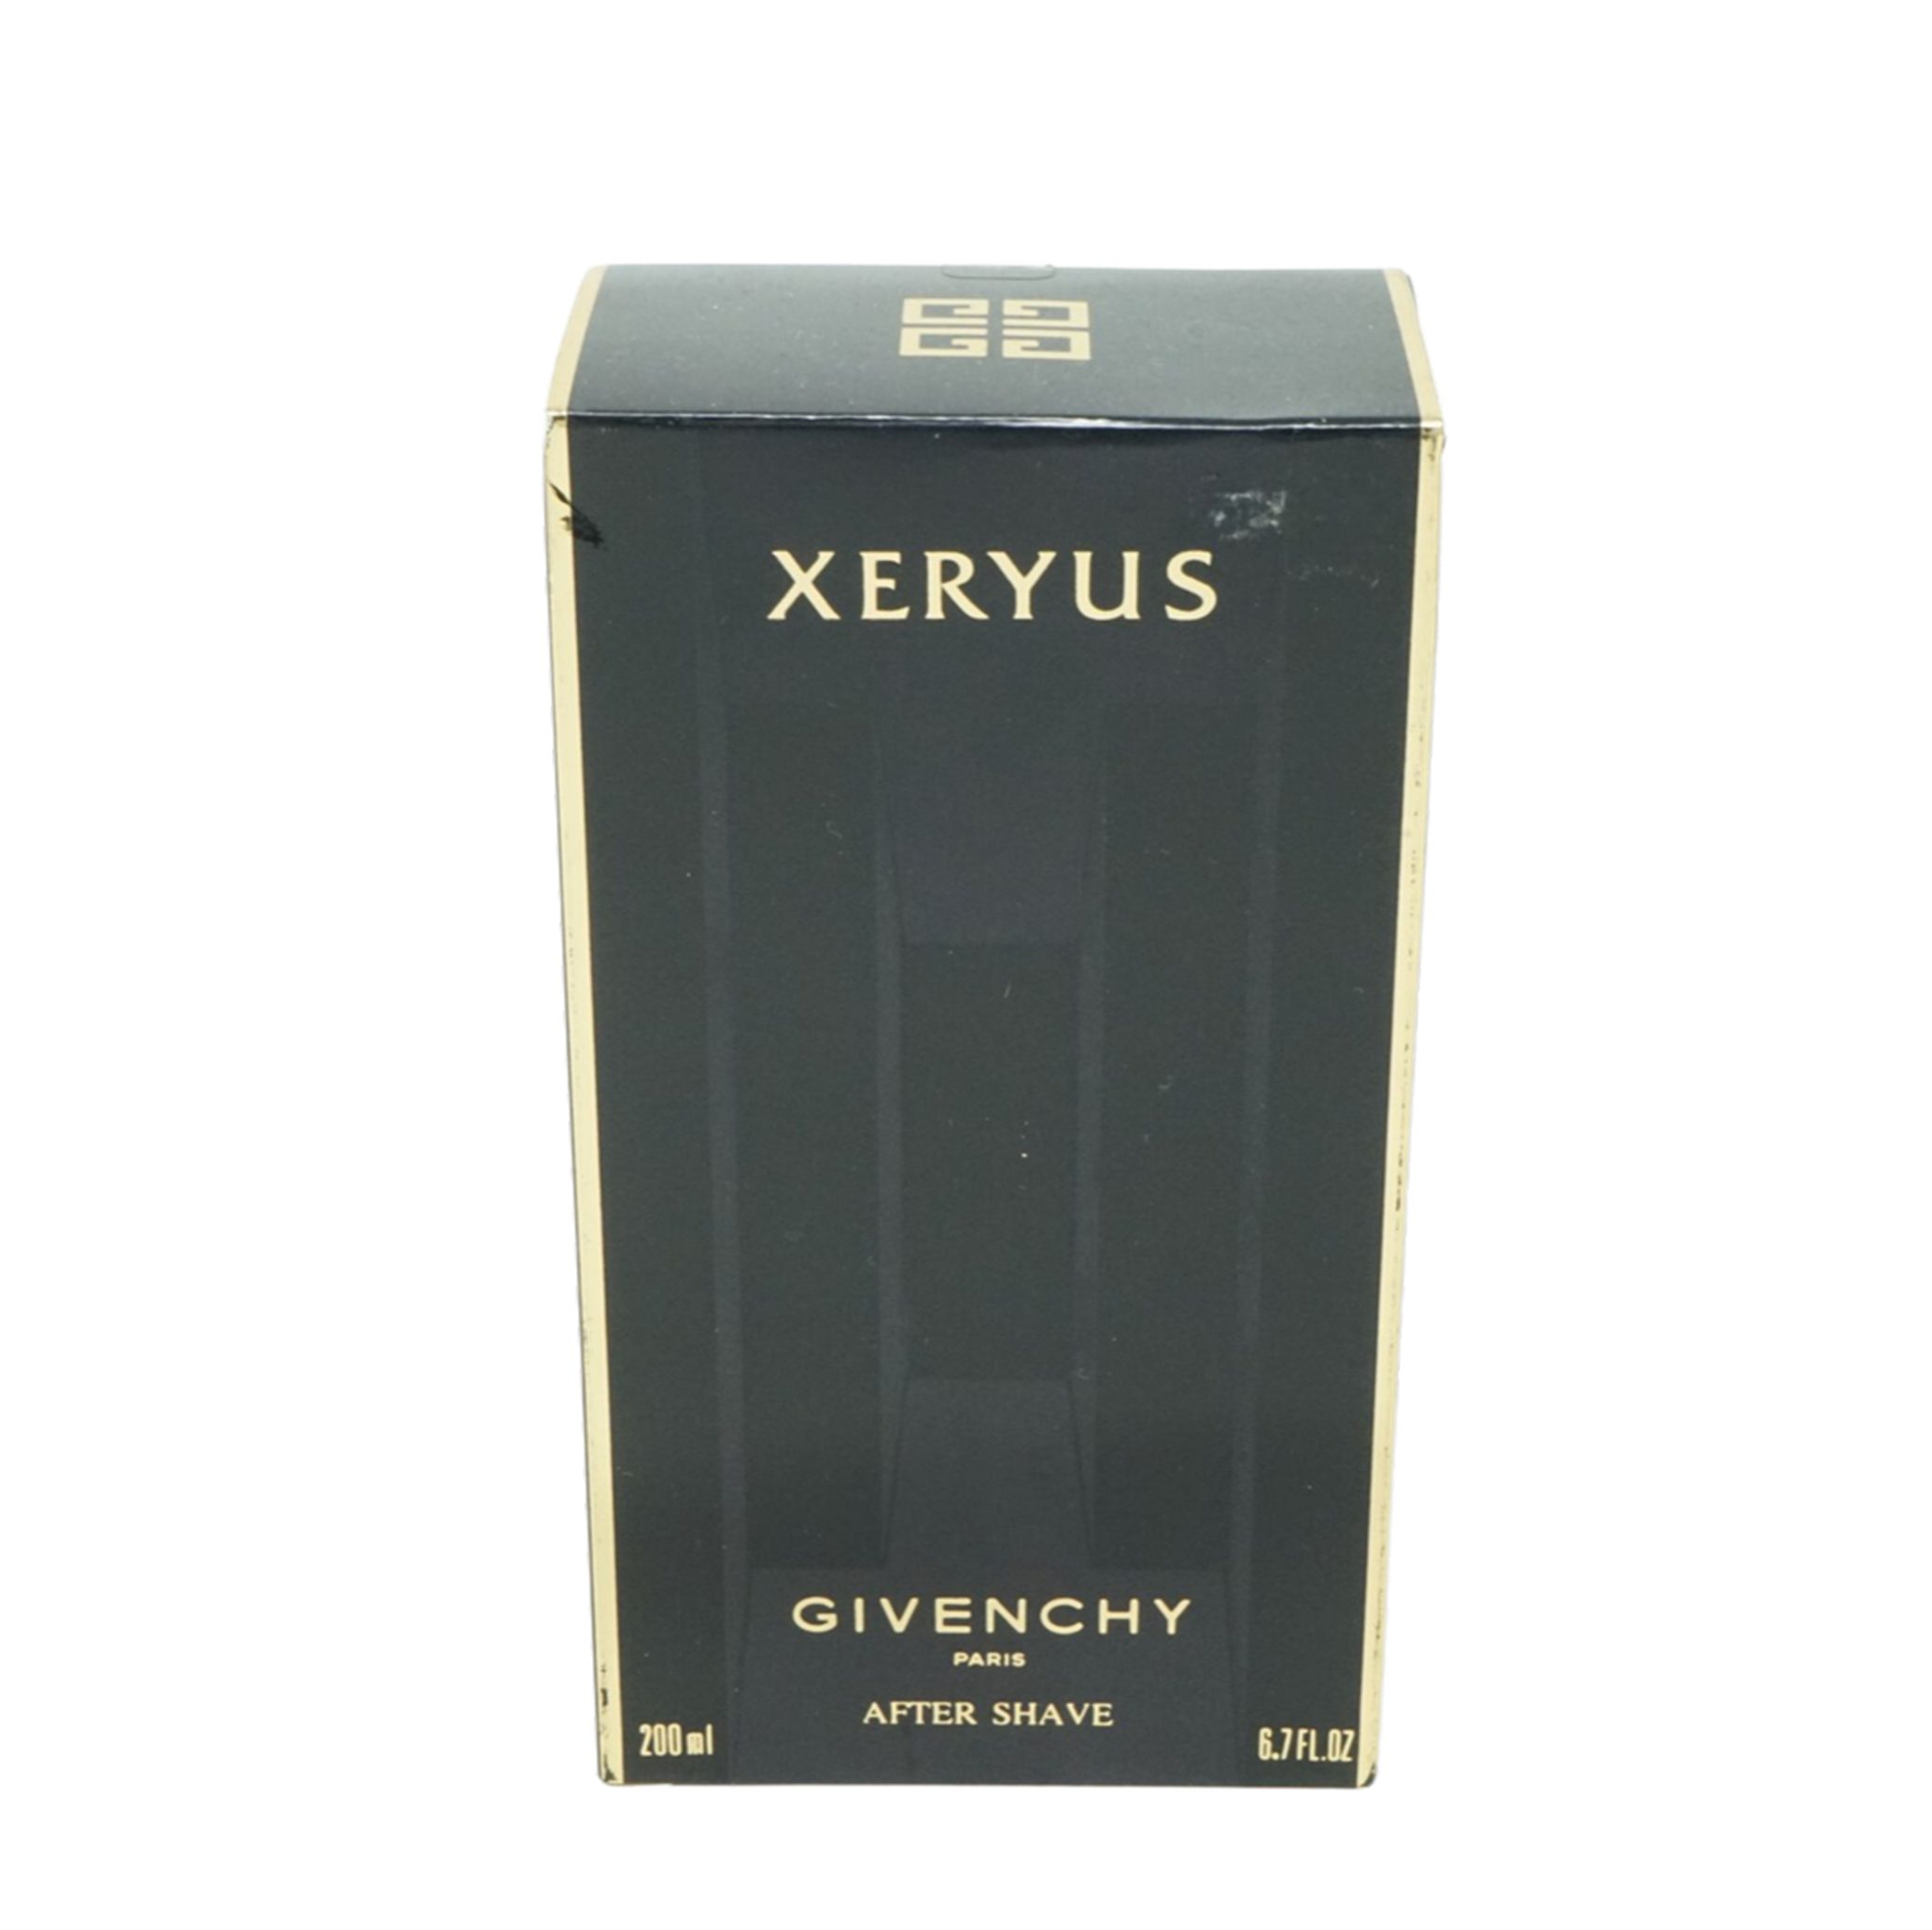 GIVENCHY After-Shave Givenchy Xeryus After Shave 200ml